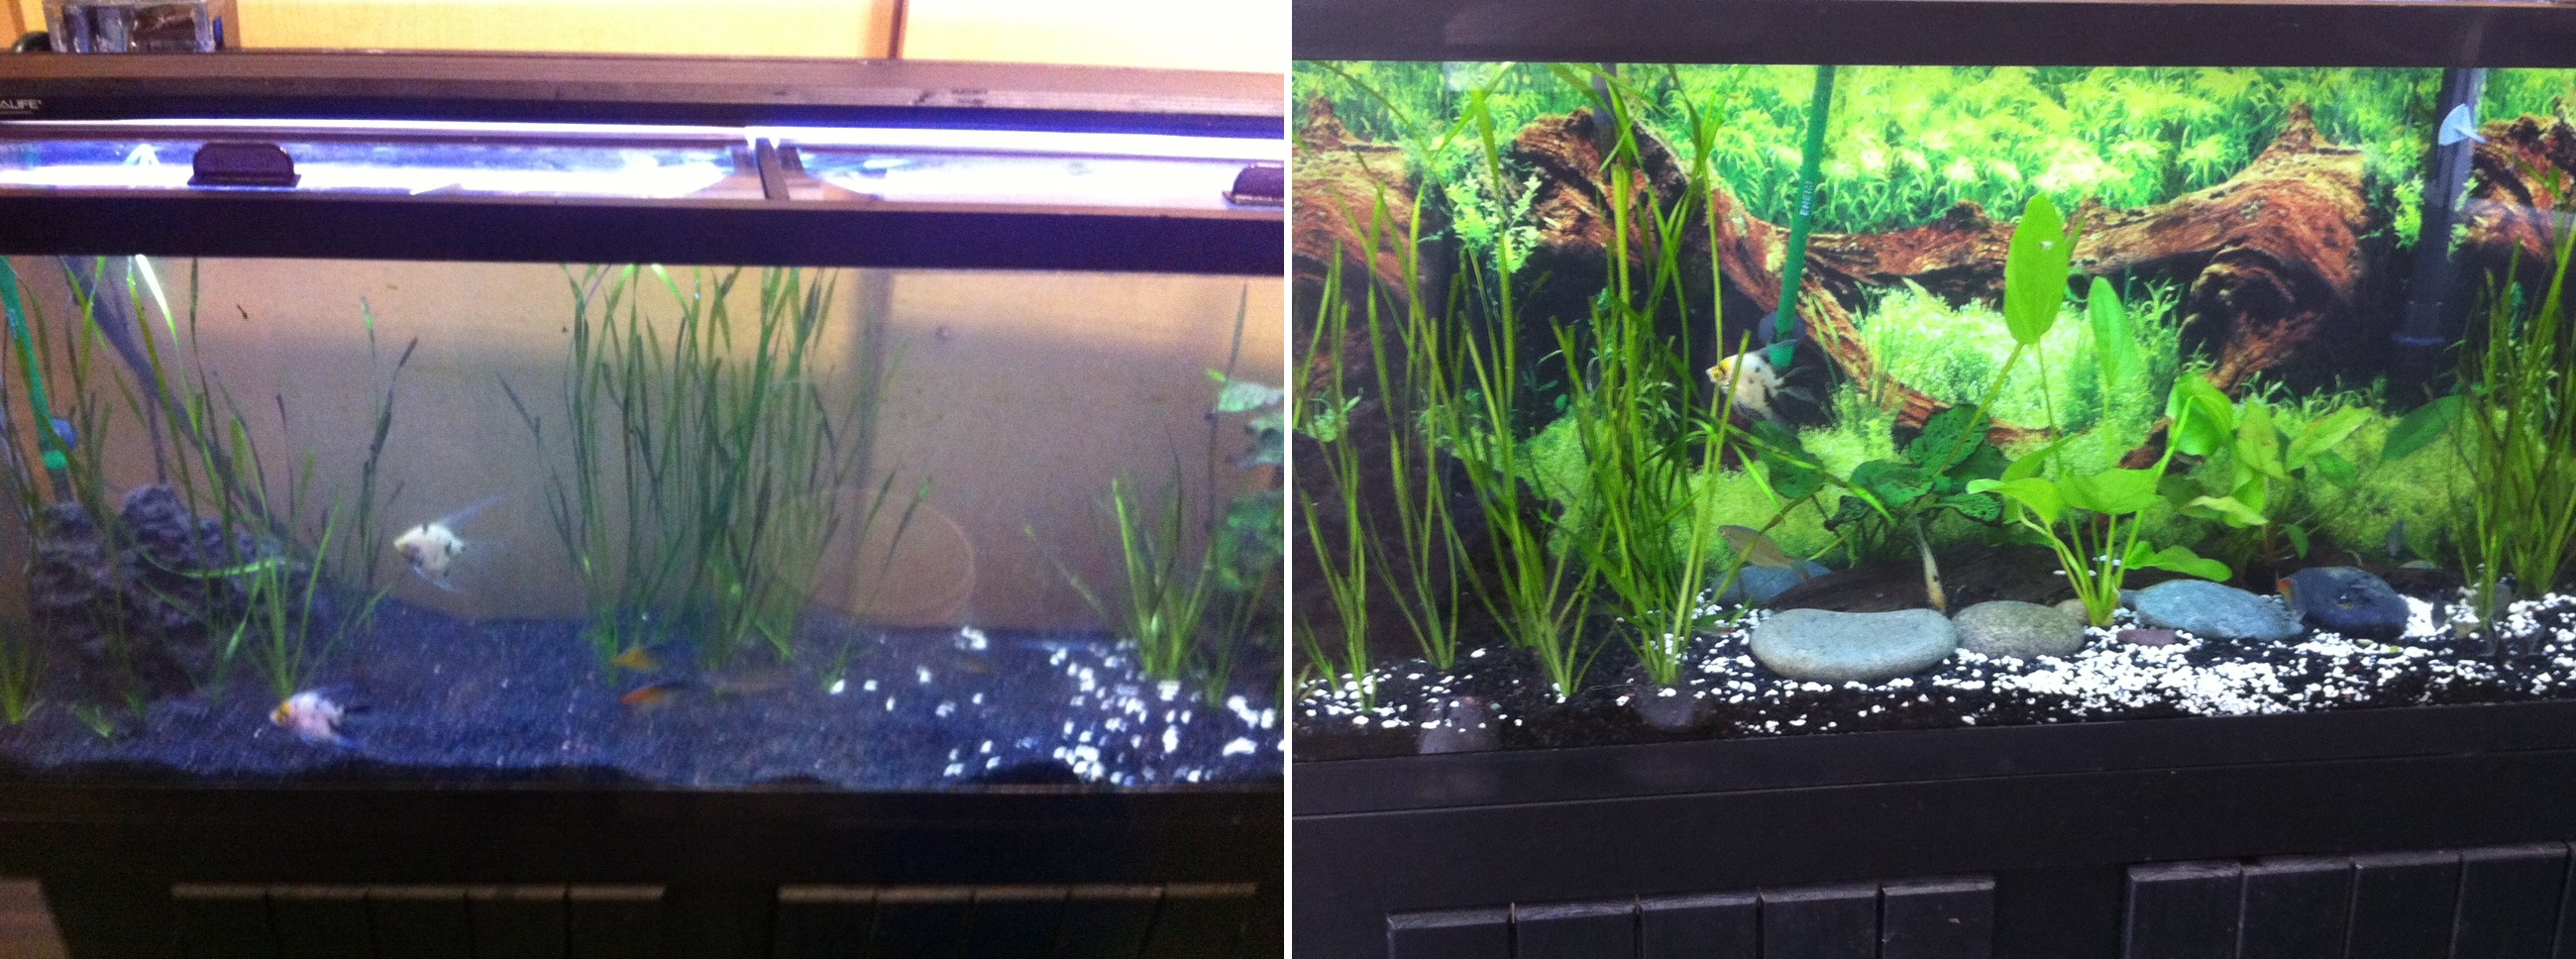 The SP aquarium before (left) and after (right) Pedro's improvements.  Courtesy of Pedro Perez.   